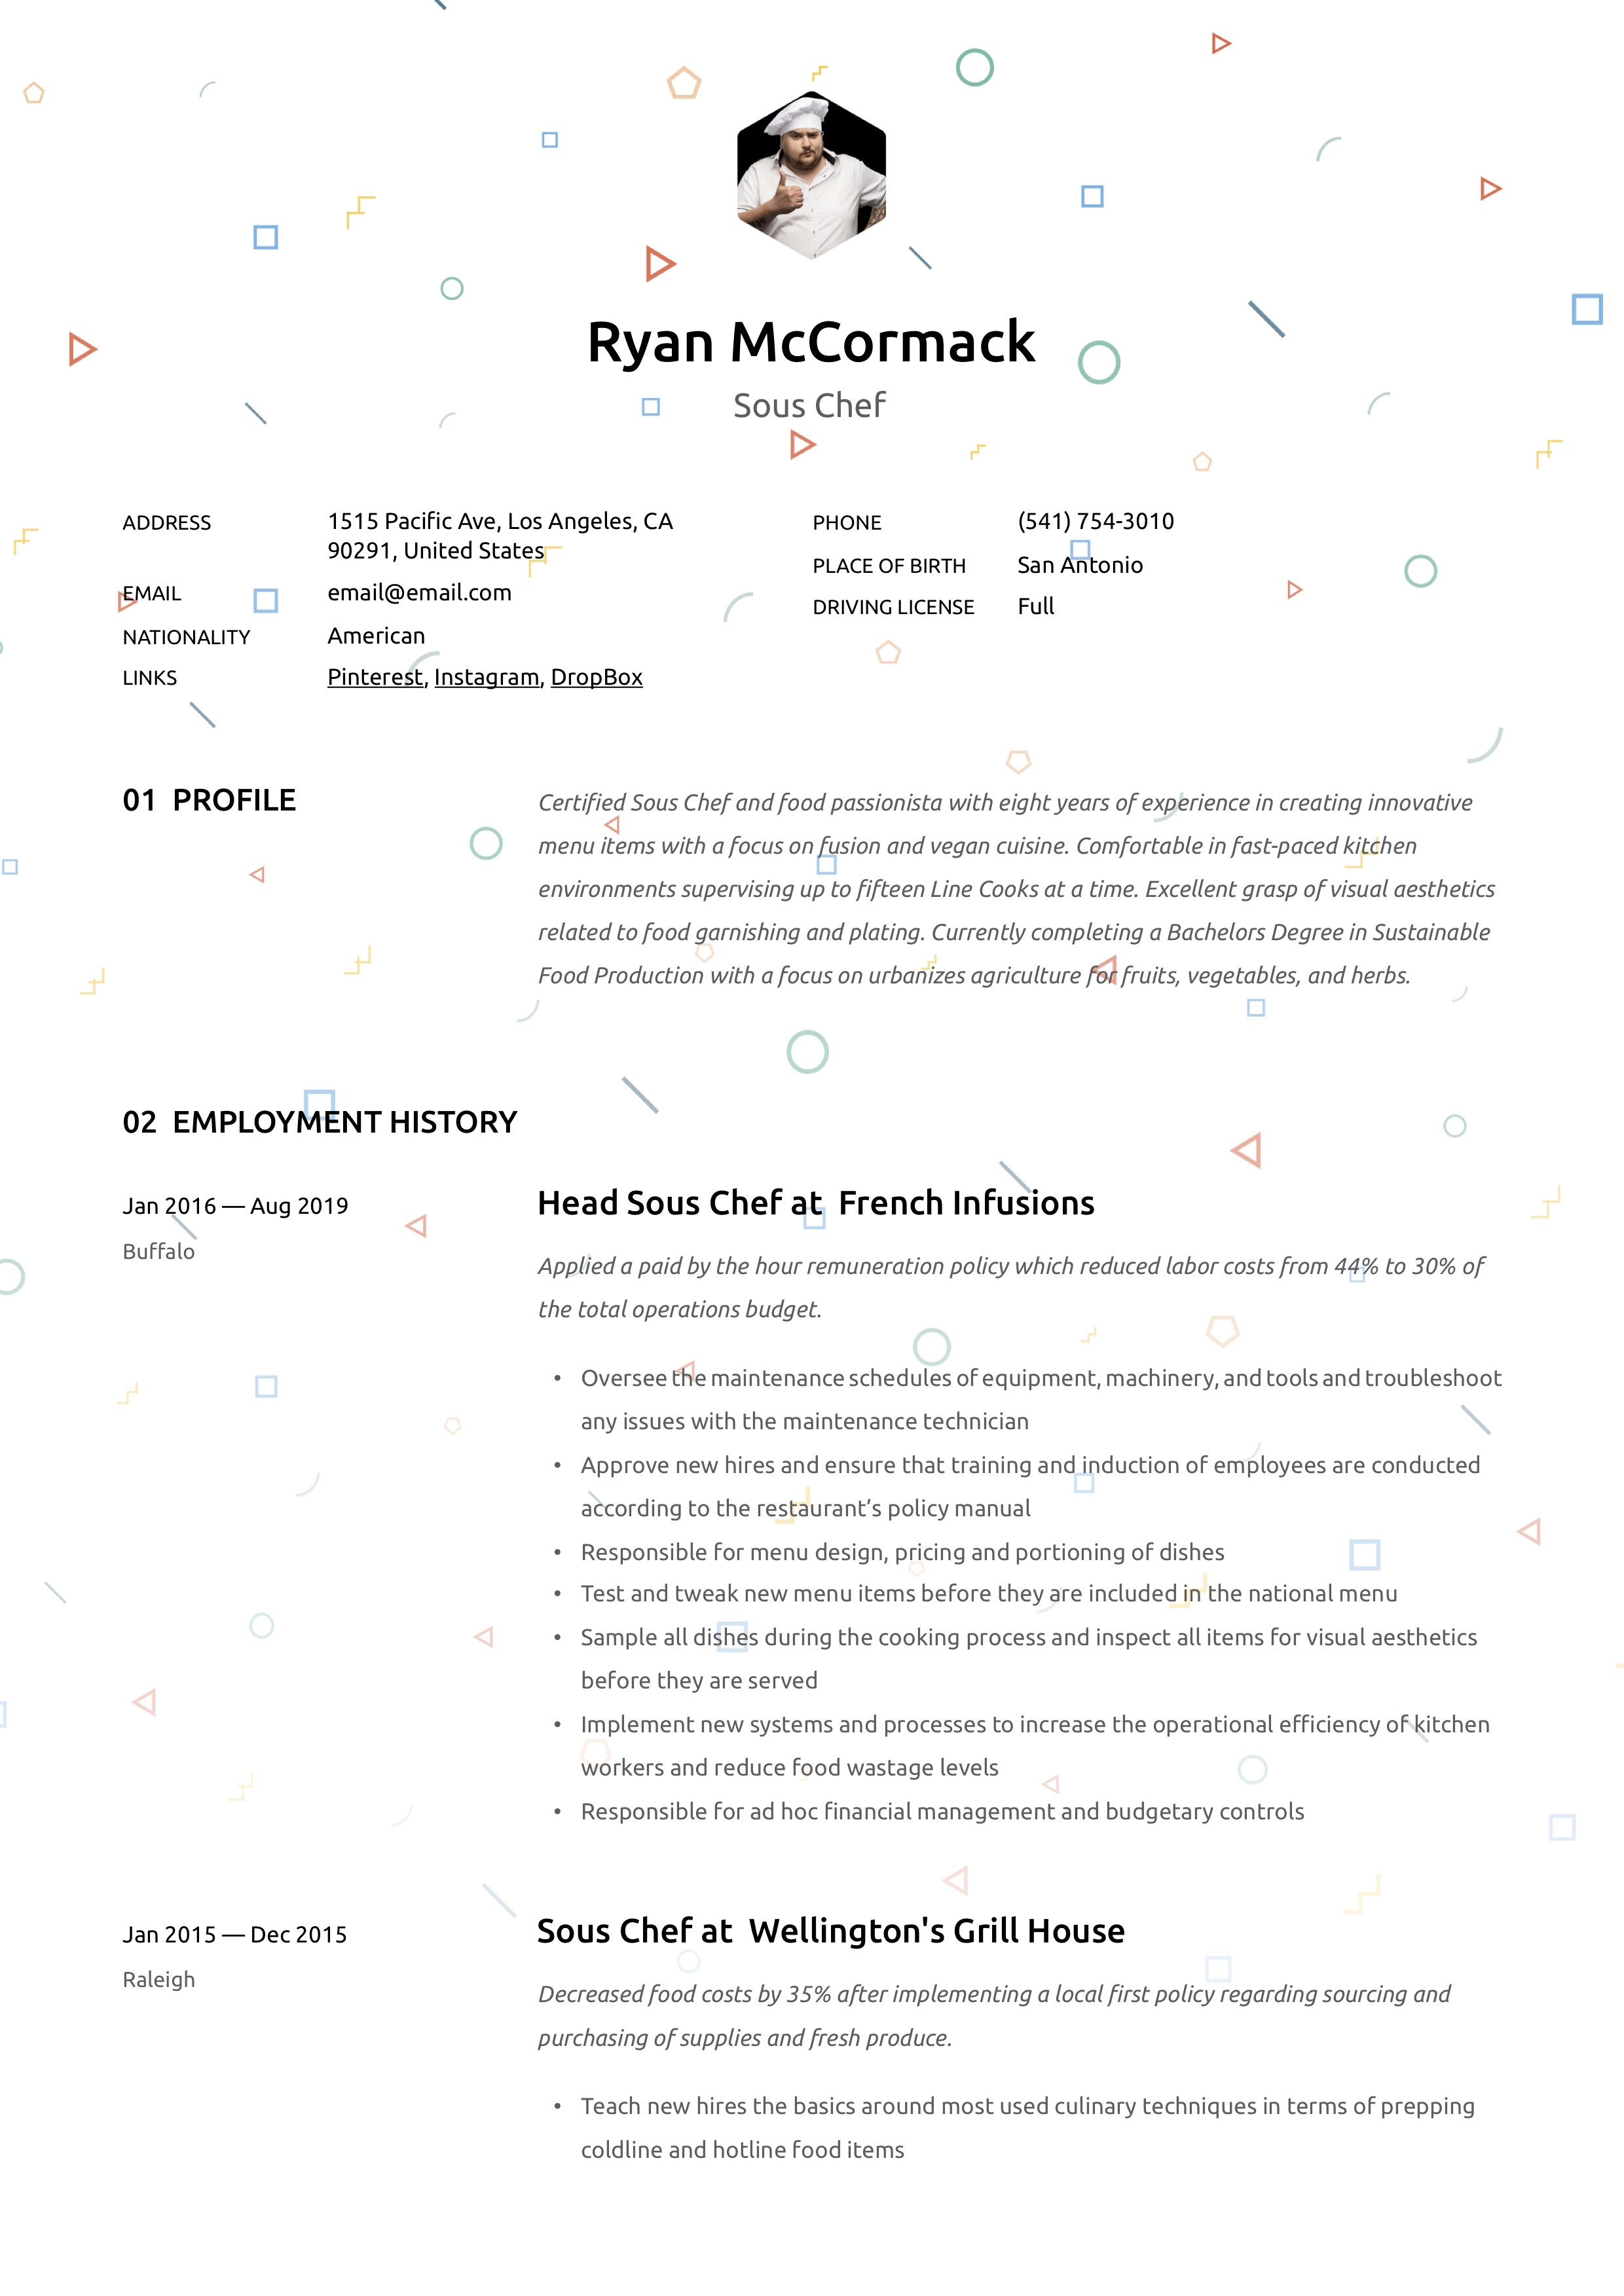 Resume Template Sous Chef